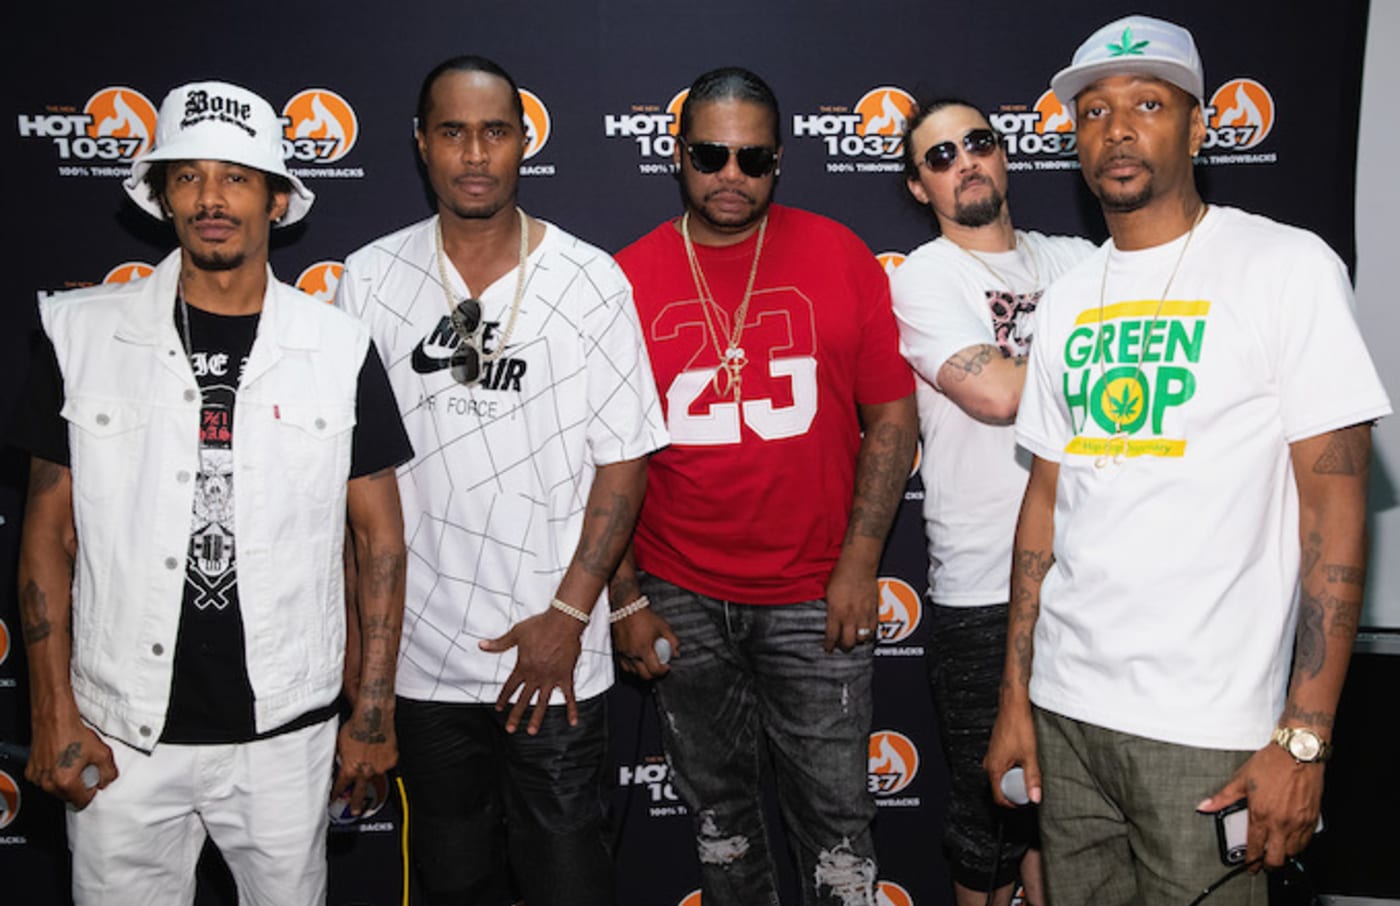 Bone Thugs n Harmony pose for a photo back stage during the All Star Throwback Jam.